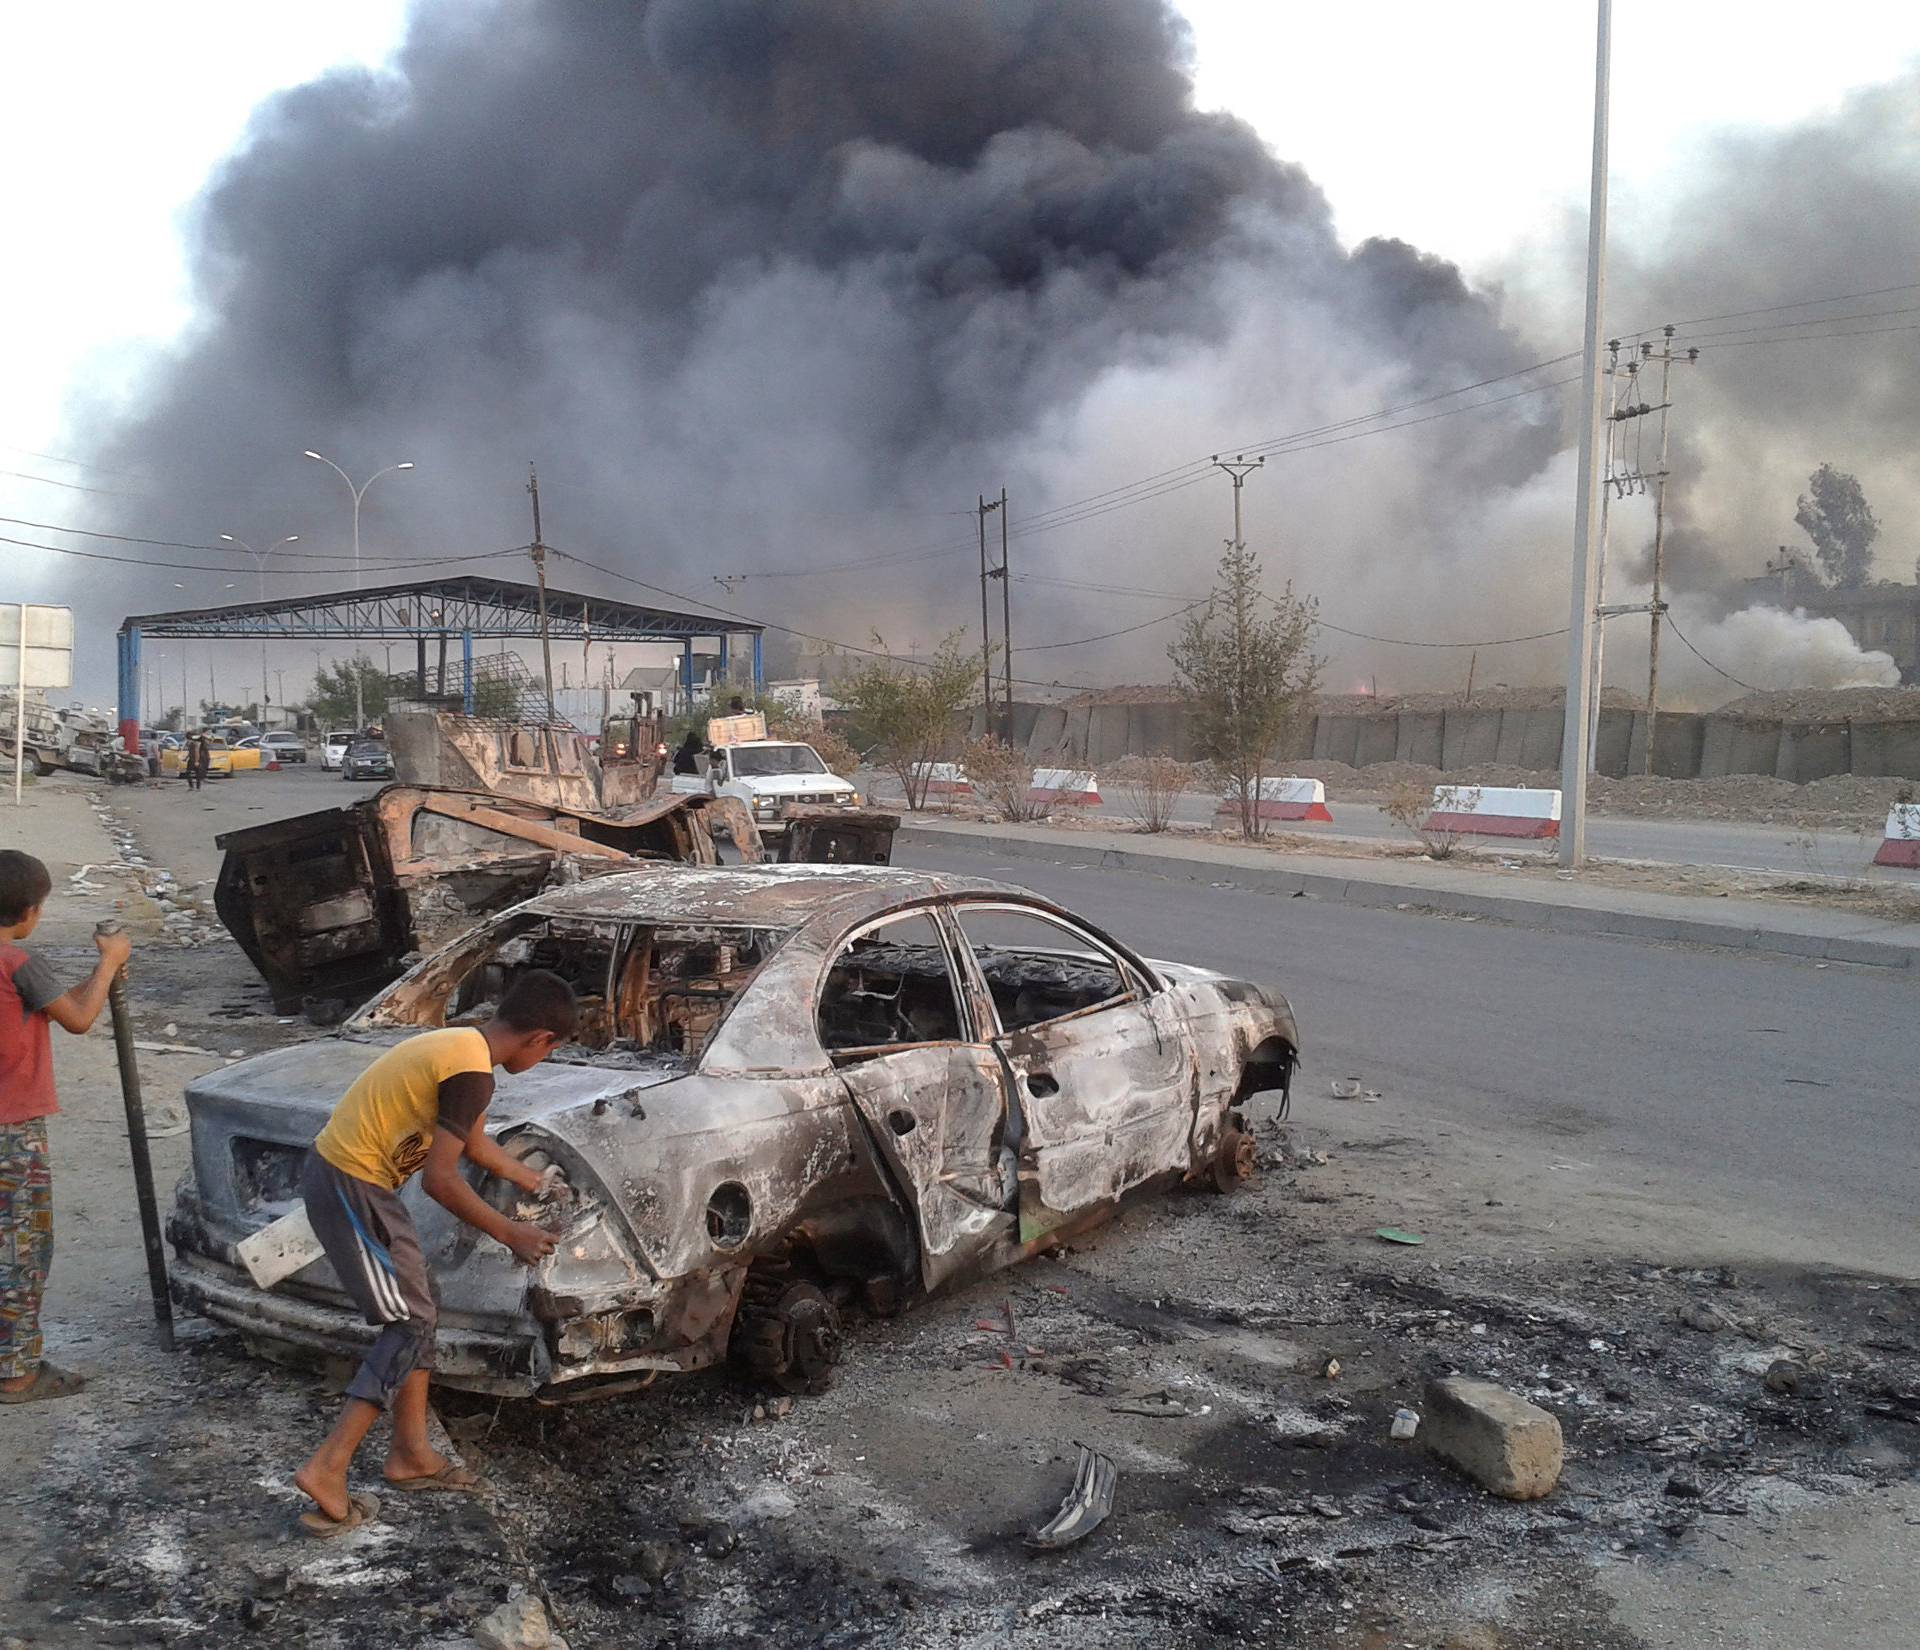 Civilian children stand next to a burnt vehicle during clashes between Iraqi security forces and al Qaeda-linked Islamic State in Iraq and the Levant (ISIL) in Mosul